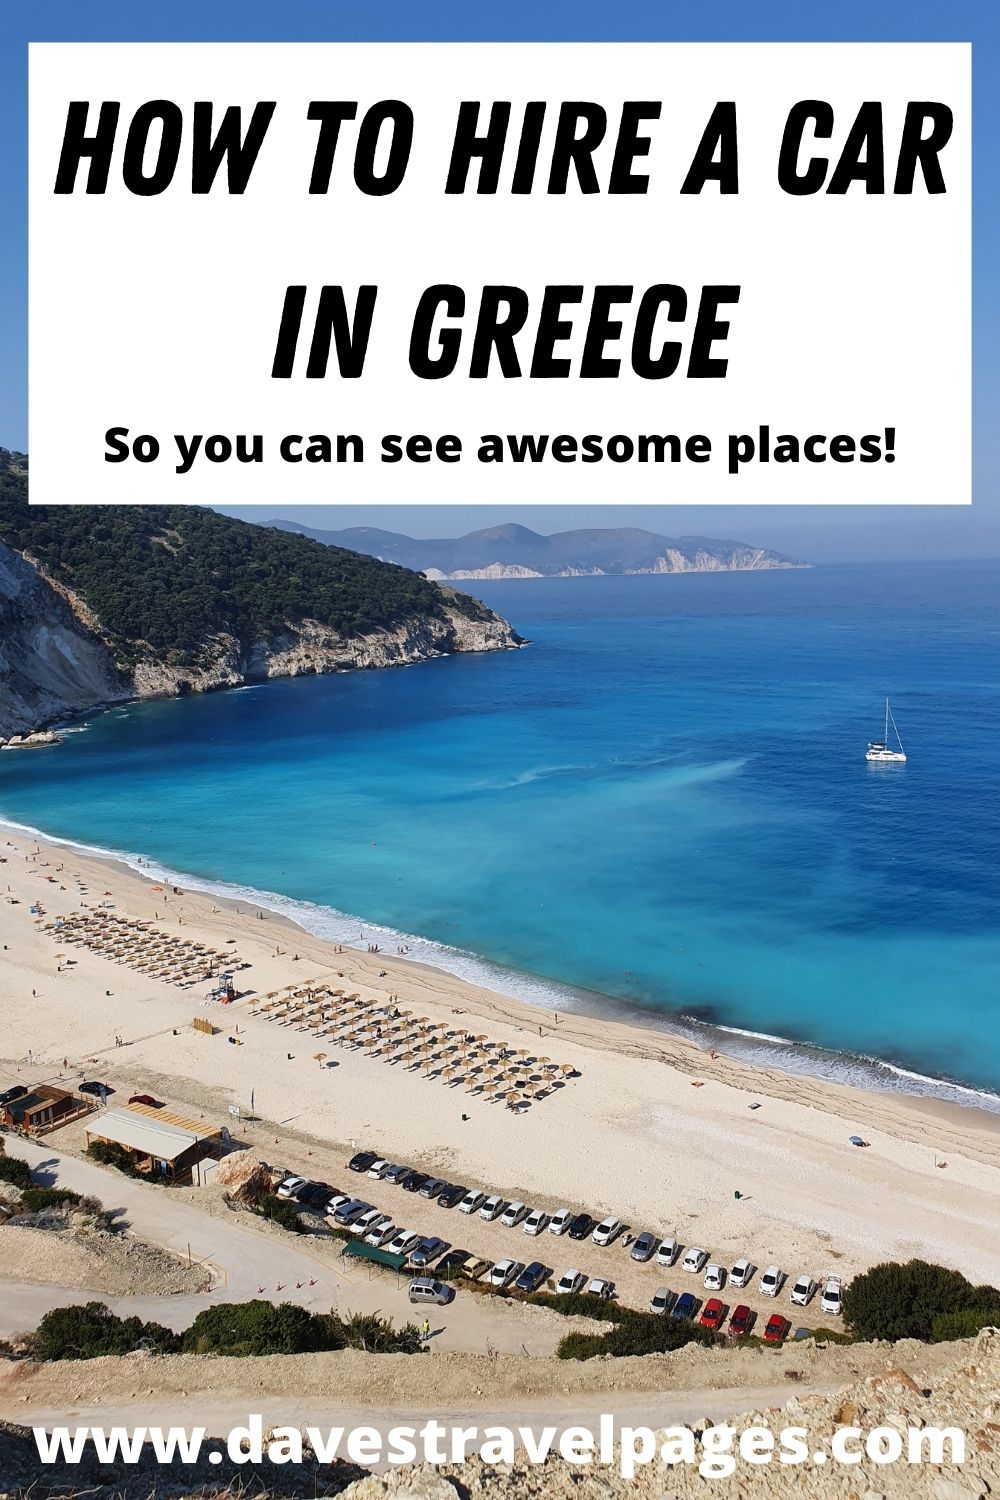 Car Rentals In Greece - Everything you need to know to get off the beaten track. If you ever asked what do i need to rent a car in Greece, this guide has the answer!